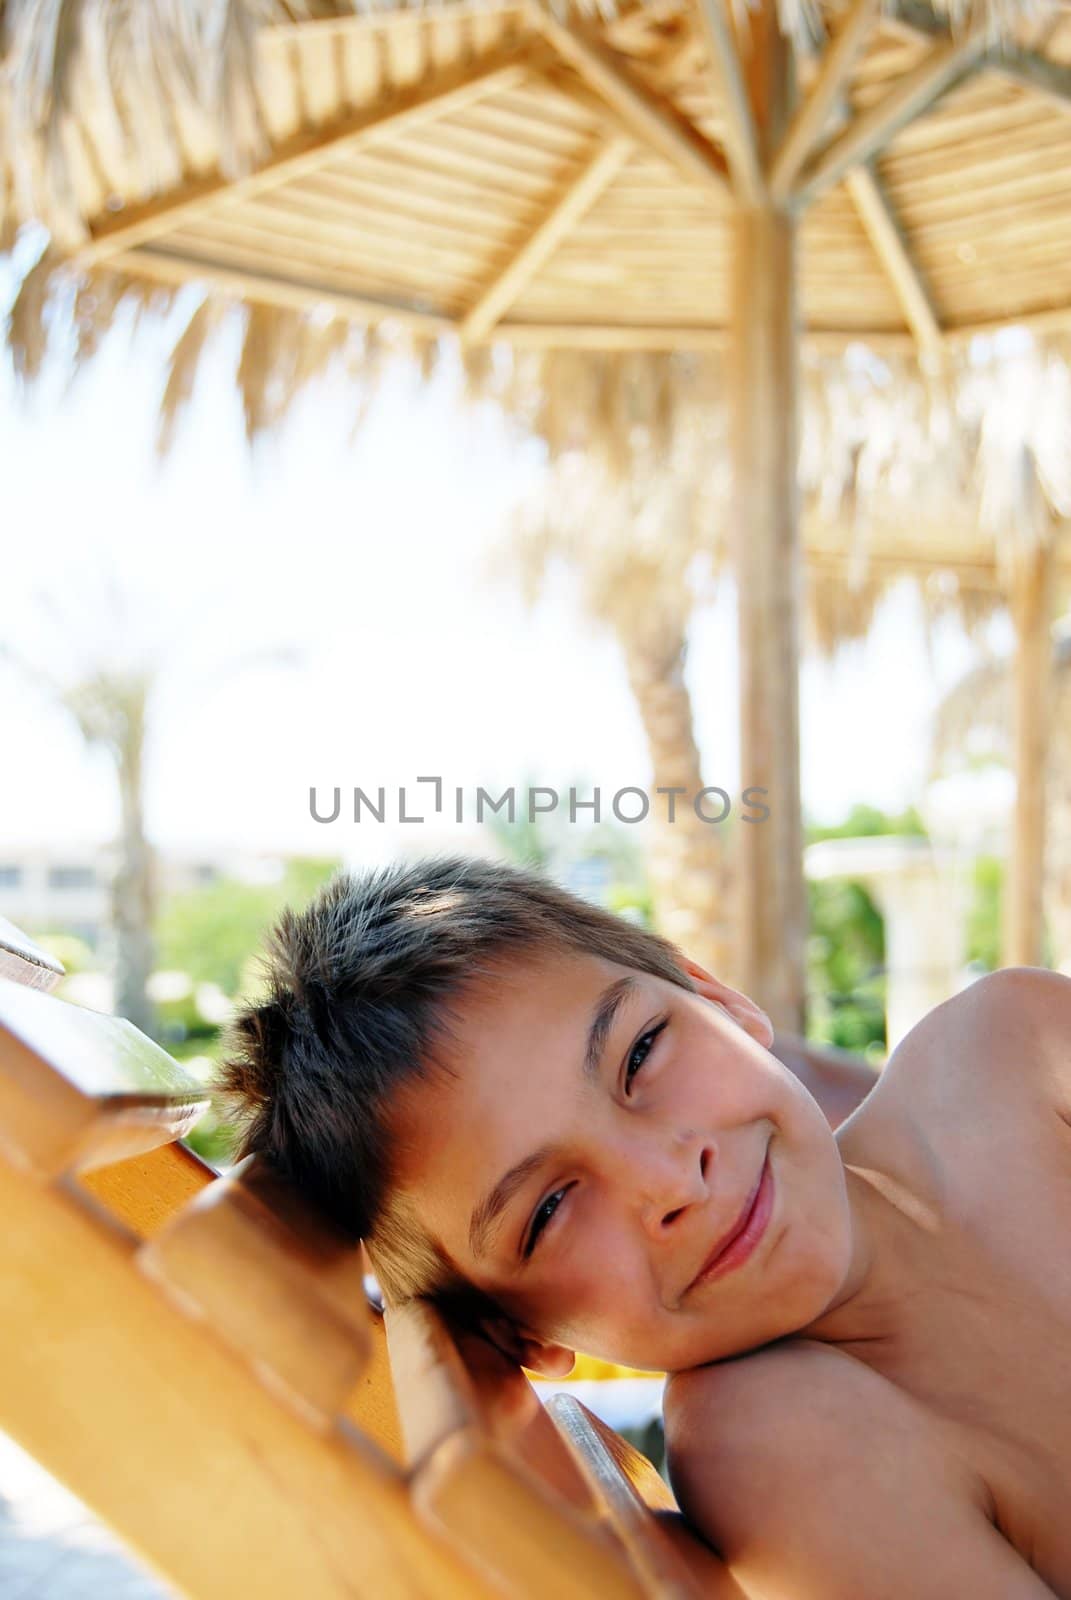 Smiling boy portrait on beach by simply